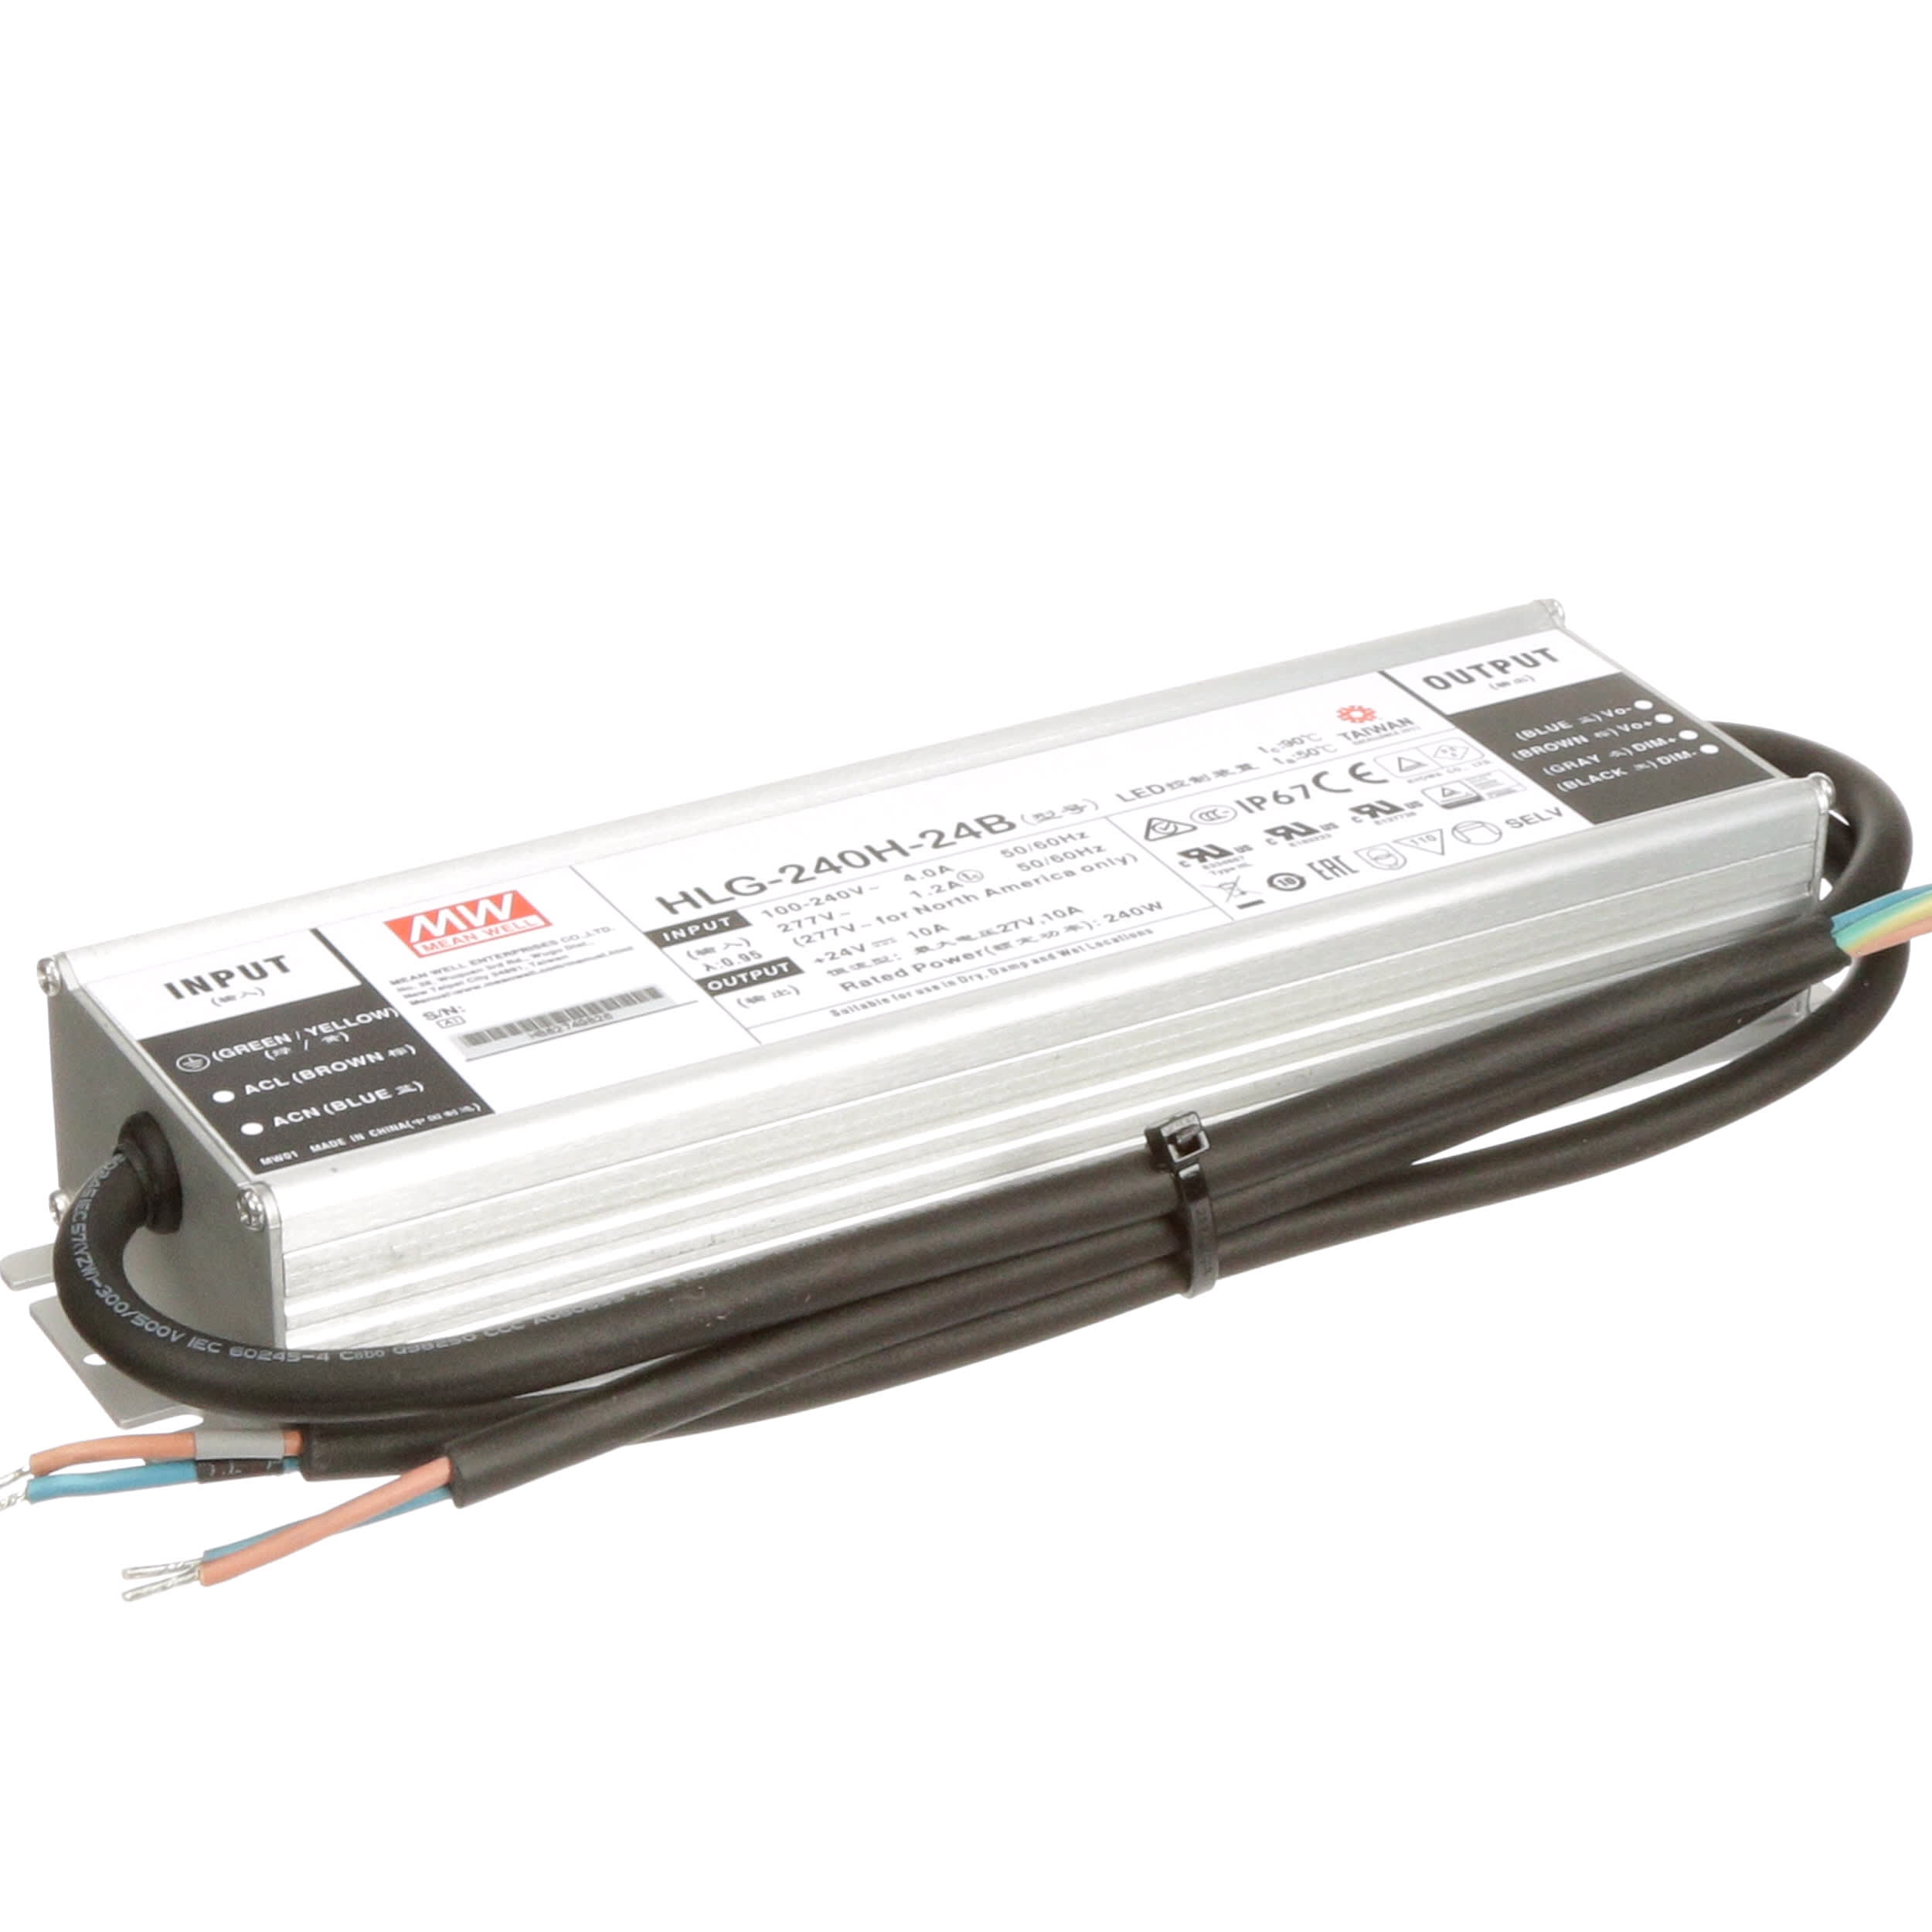 HLG-240H-24B - Mean Well LED PSU 240W 90-305VAC 24VDC/10A